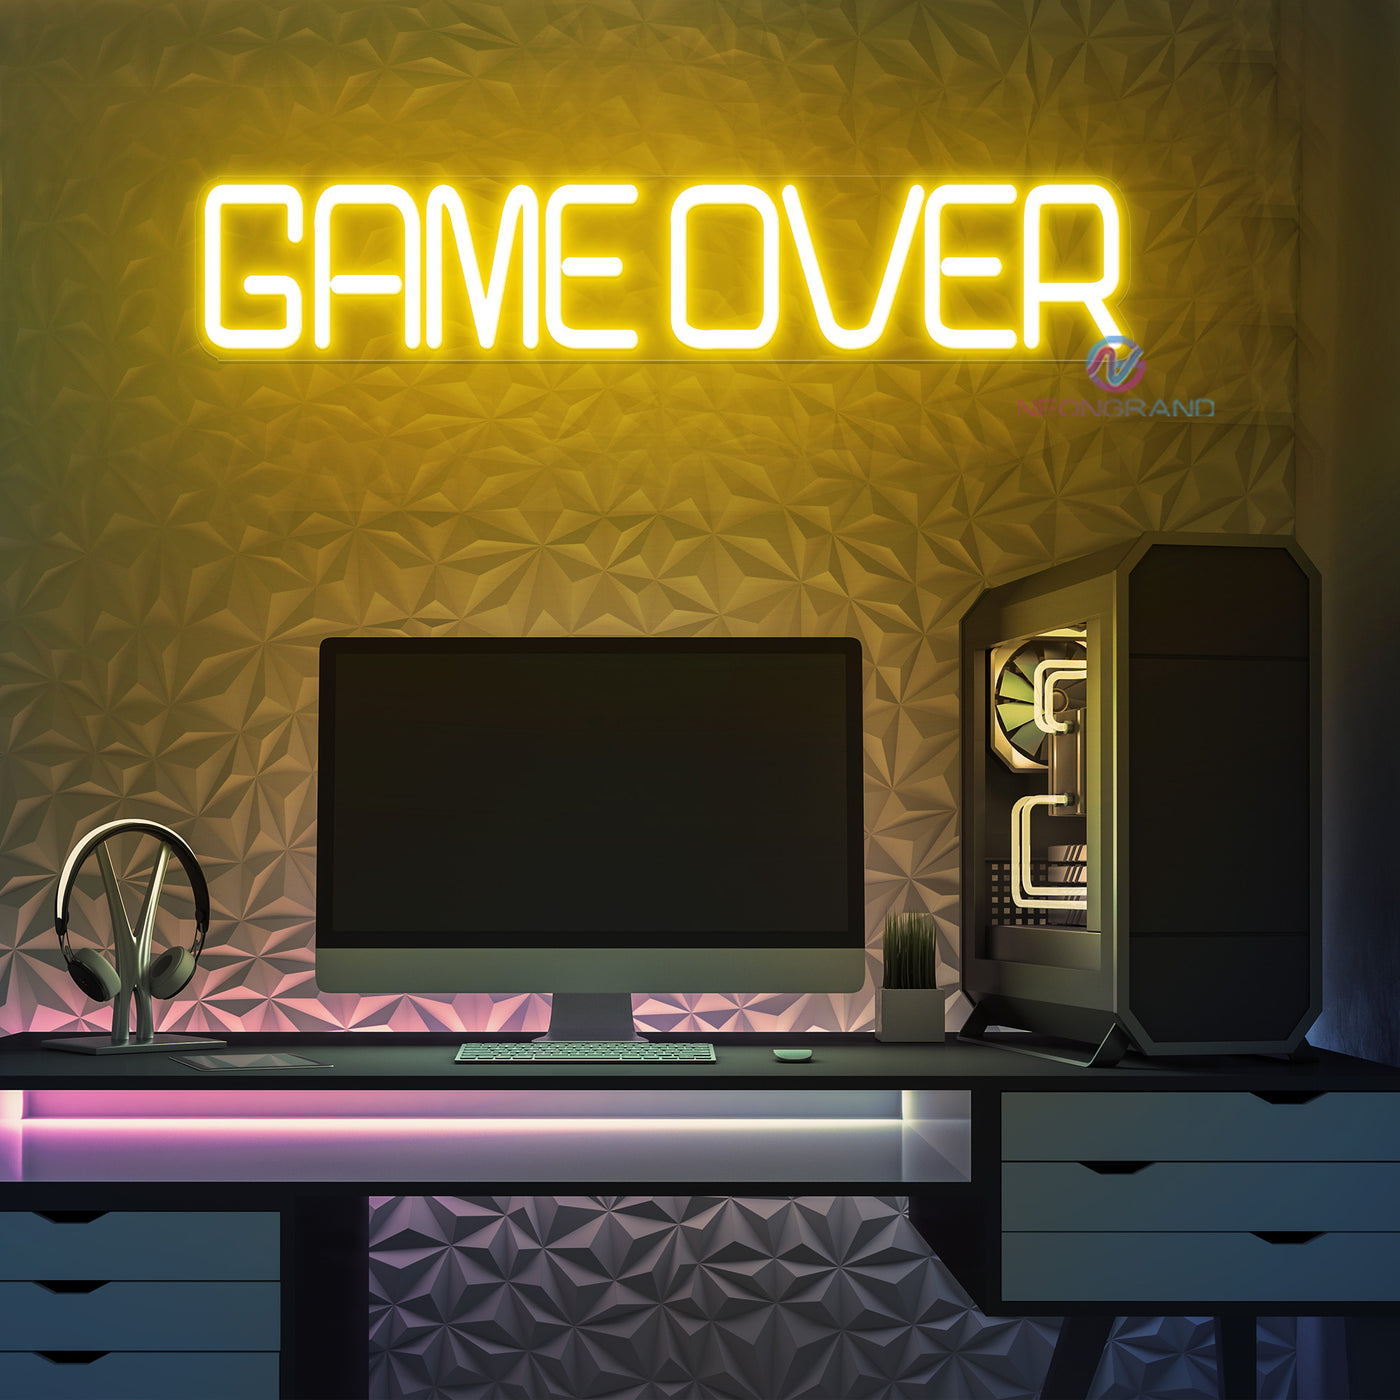 Game Over Neon Sign Arcade Gaming Room Led Light